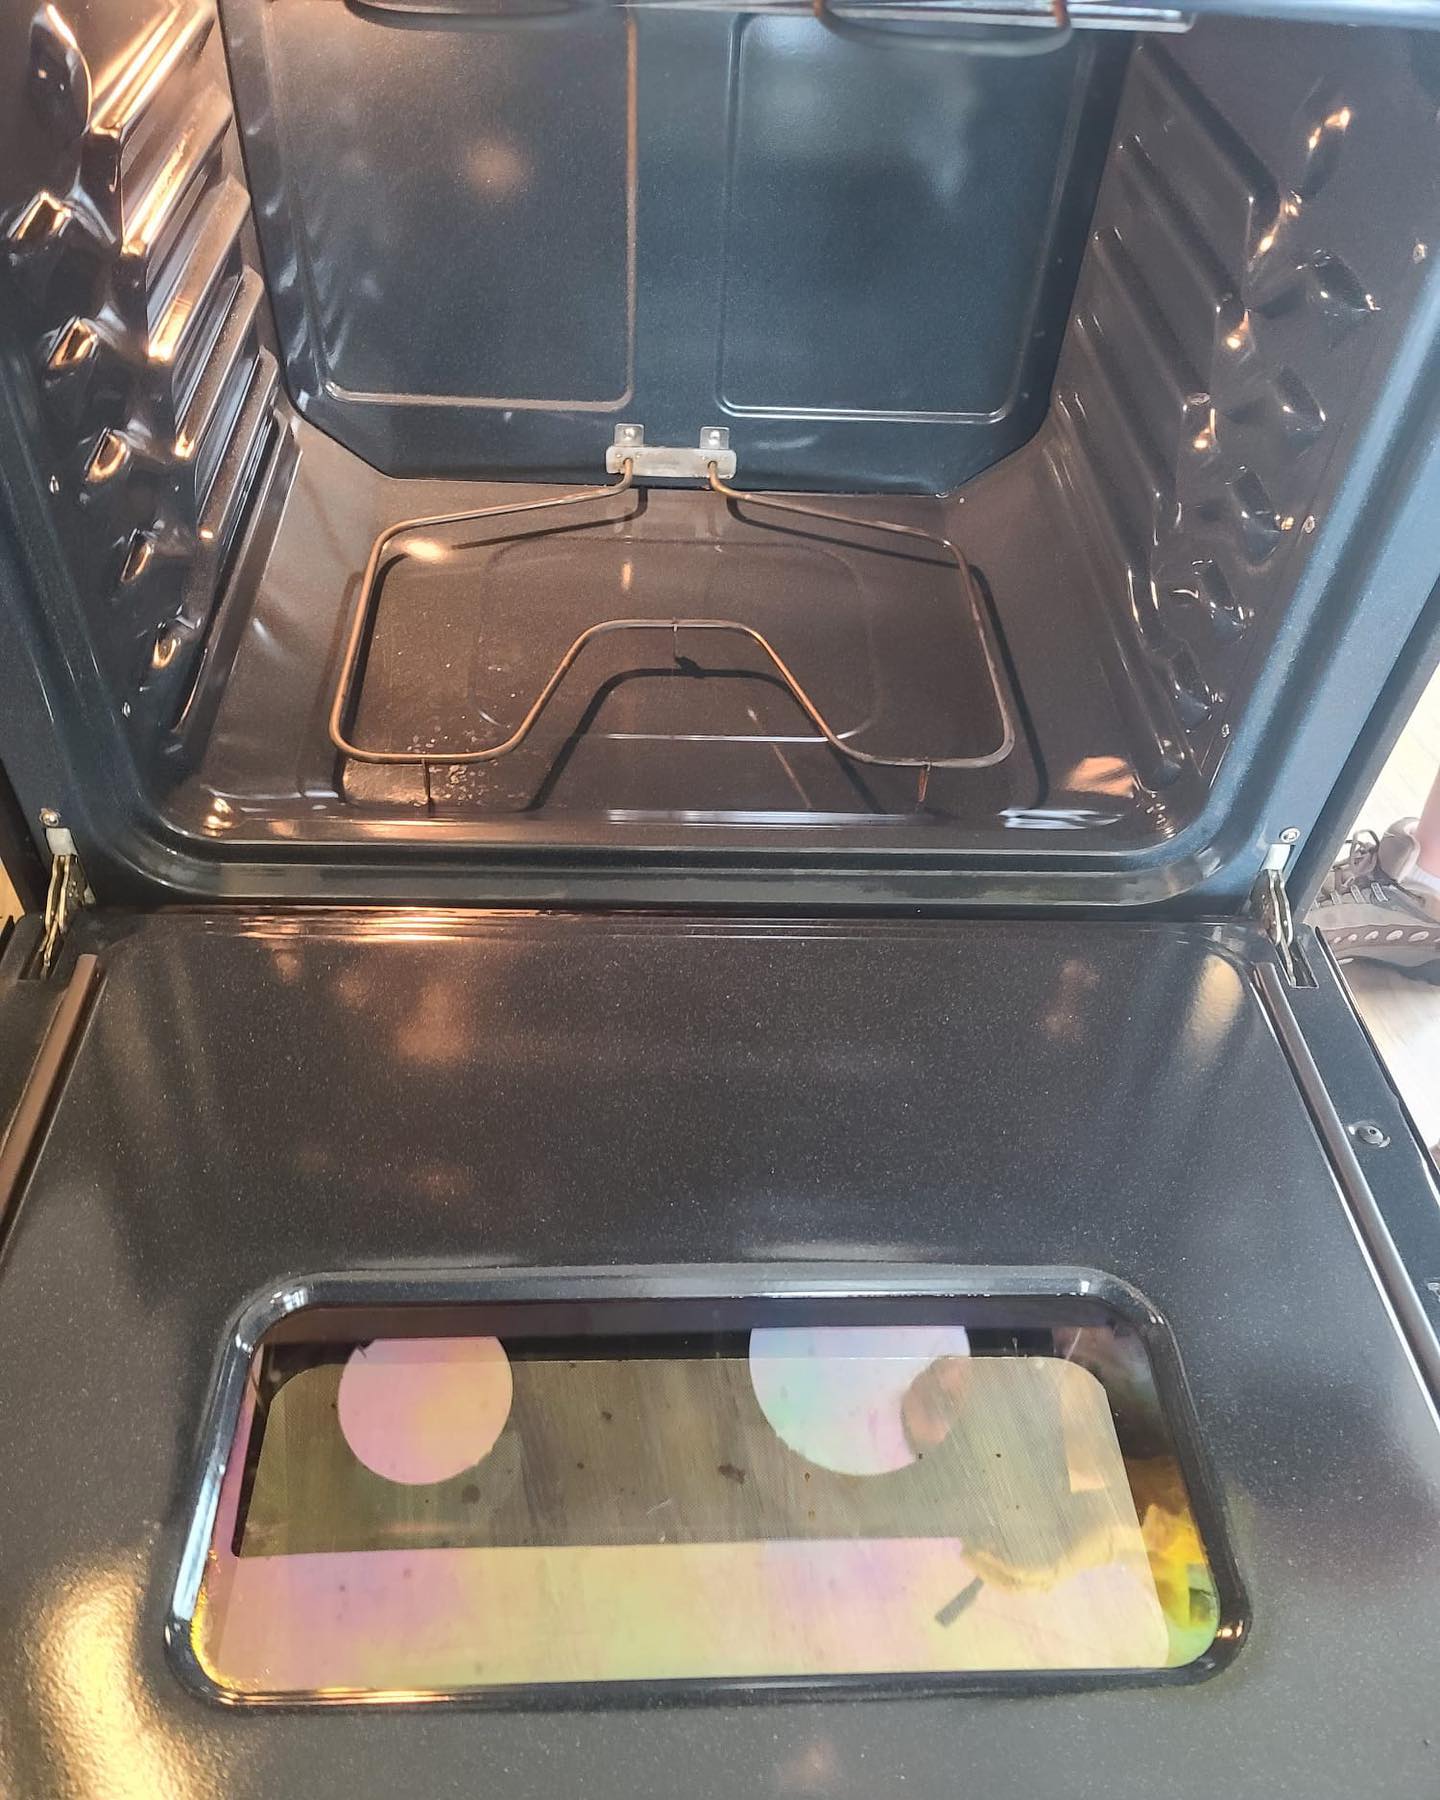 clean oven after move out